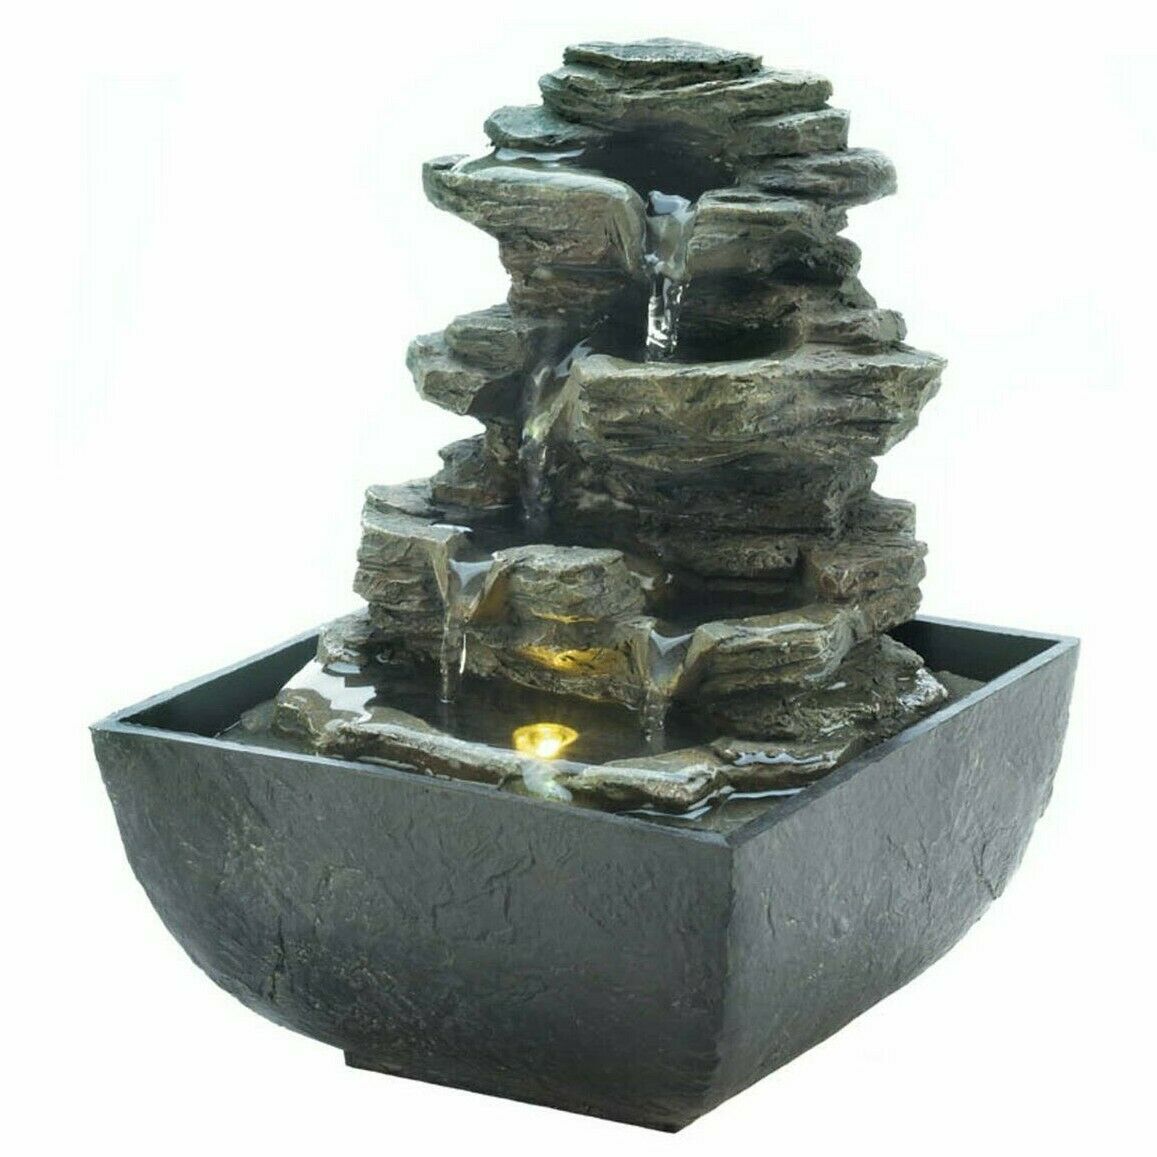 Multi-Level Tiered Rocks Lighted Tabletop Fountain Accent Plus